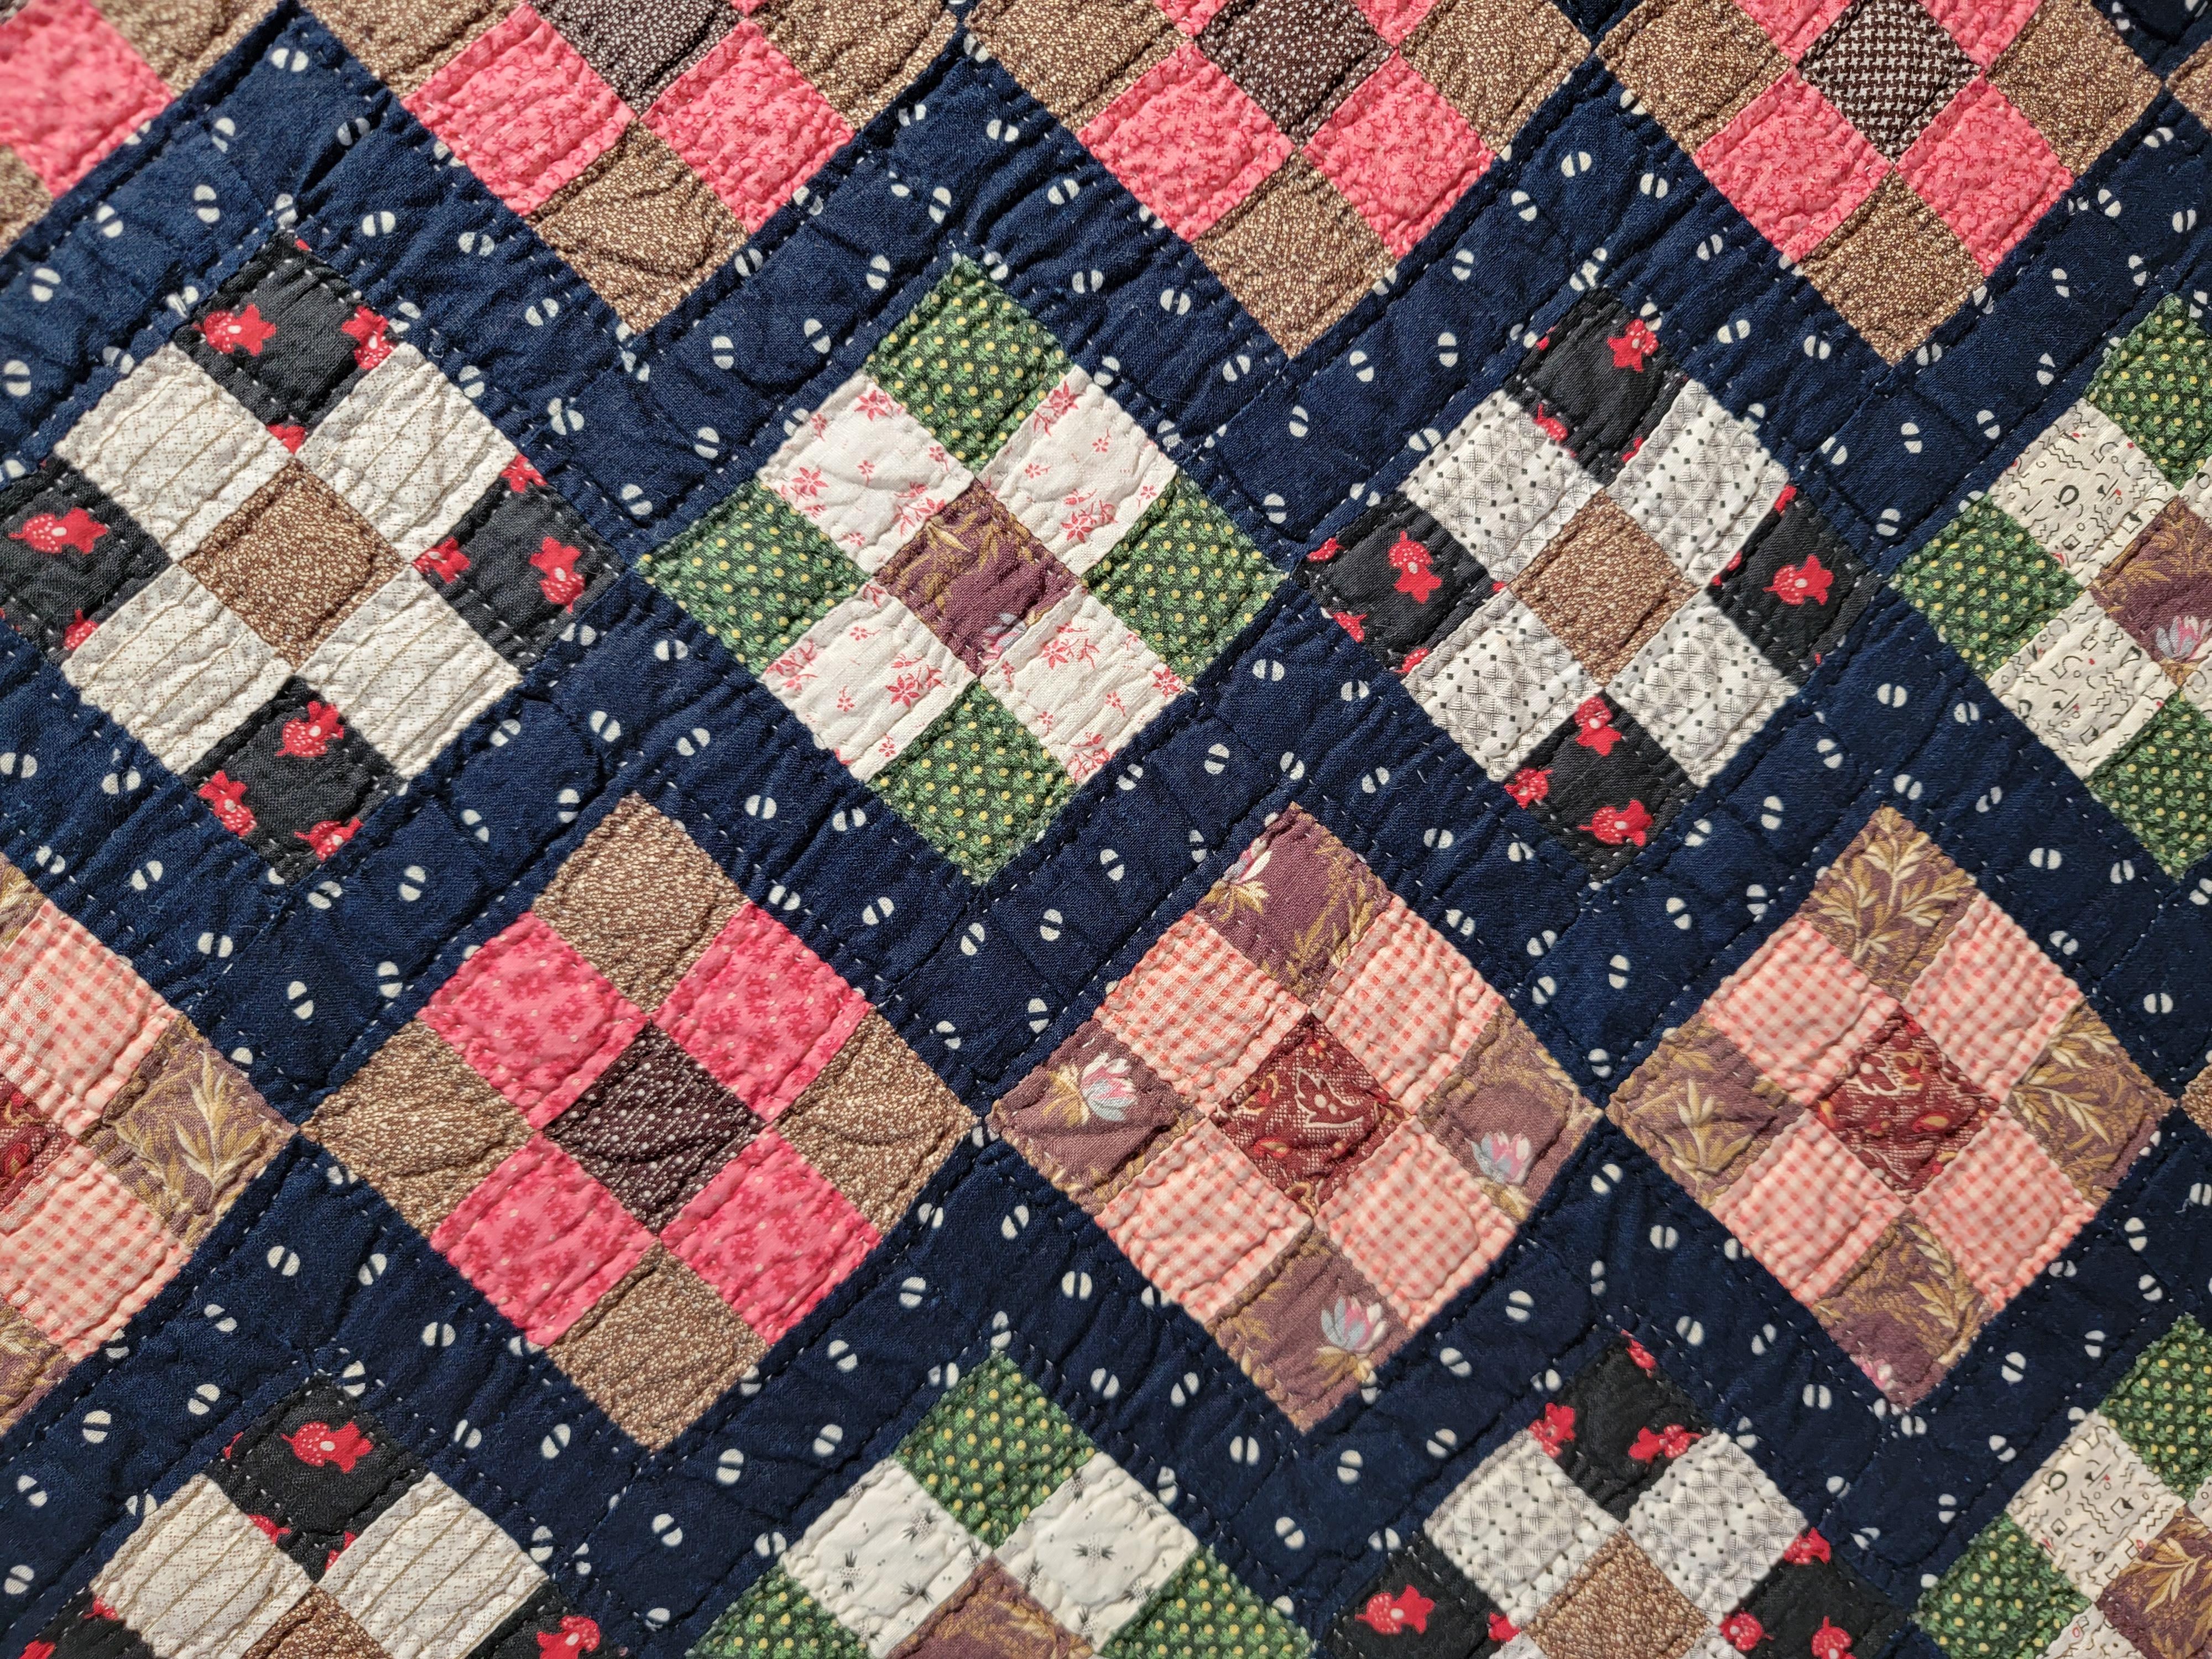 Hand-Crafted 19th C Postage Stamp Crib Quilt- Mounted For Sale